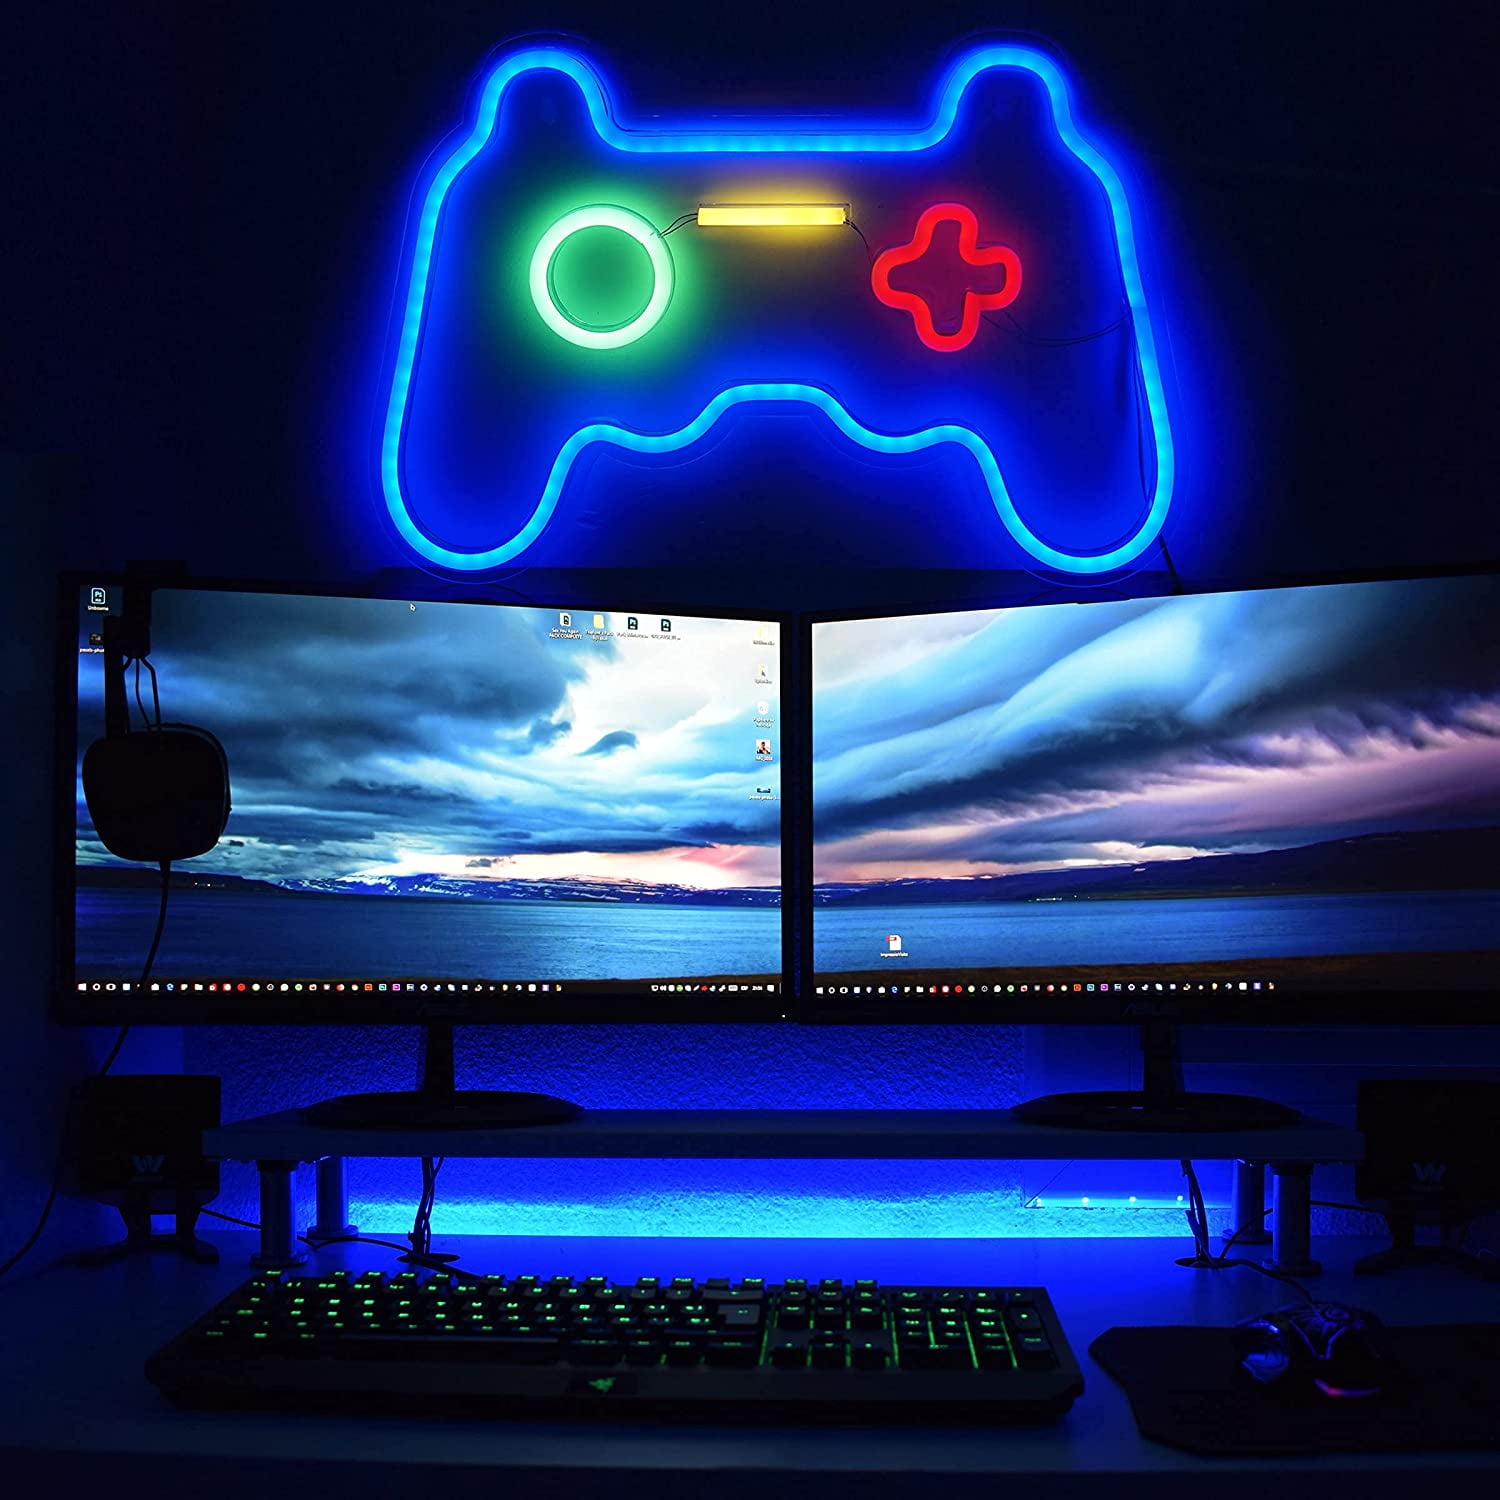 Gamepad Neon Sign Light Bedroom Wall Decor Gaming Lights Teen Boys Room  Decor LED Wall Sign Playstation Light Up Sign Video Game Room Accessories  for Gamer Gift Birthday Party Room Decorations 